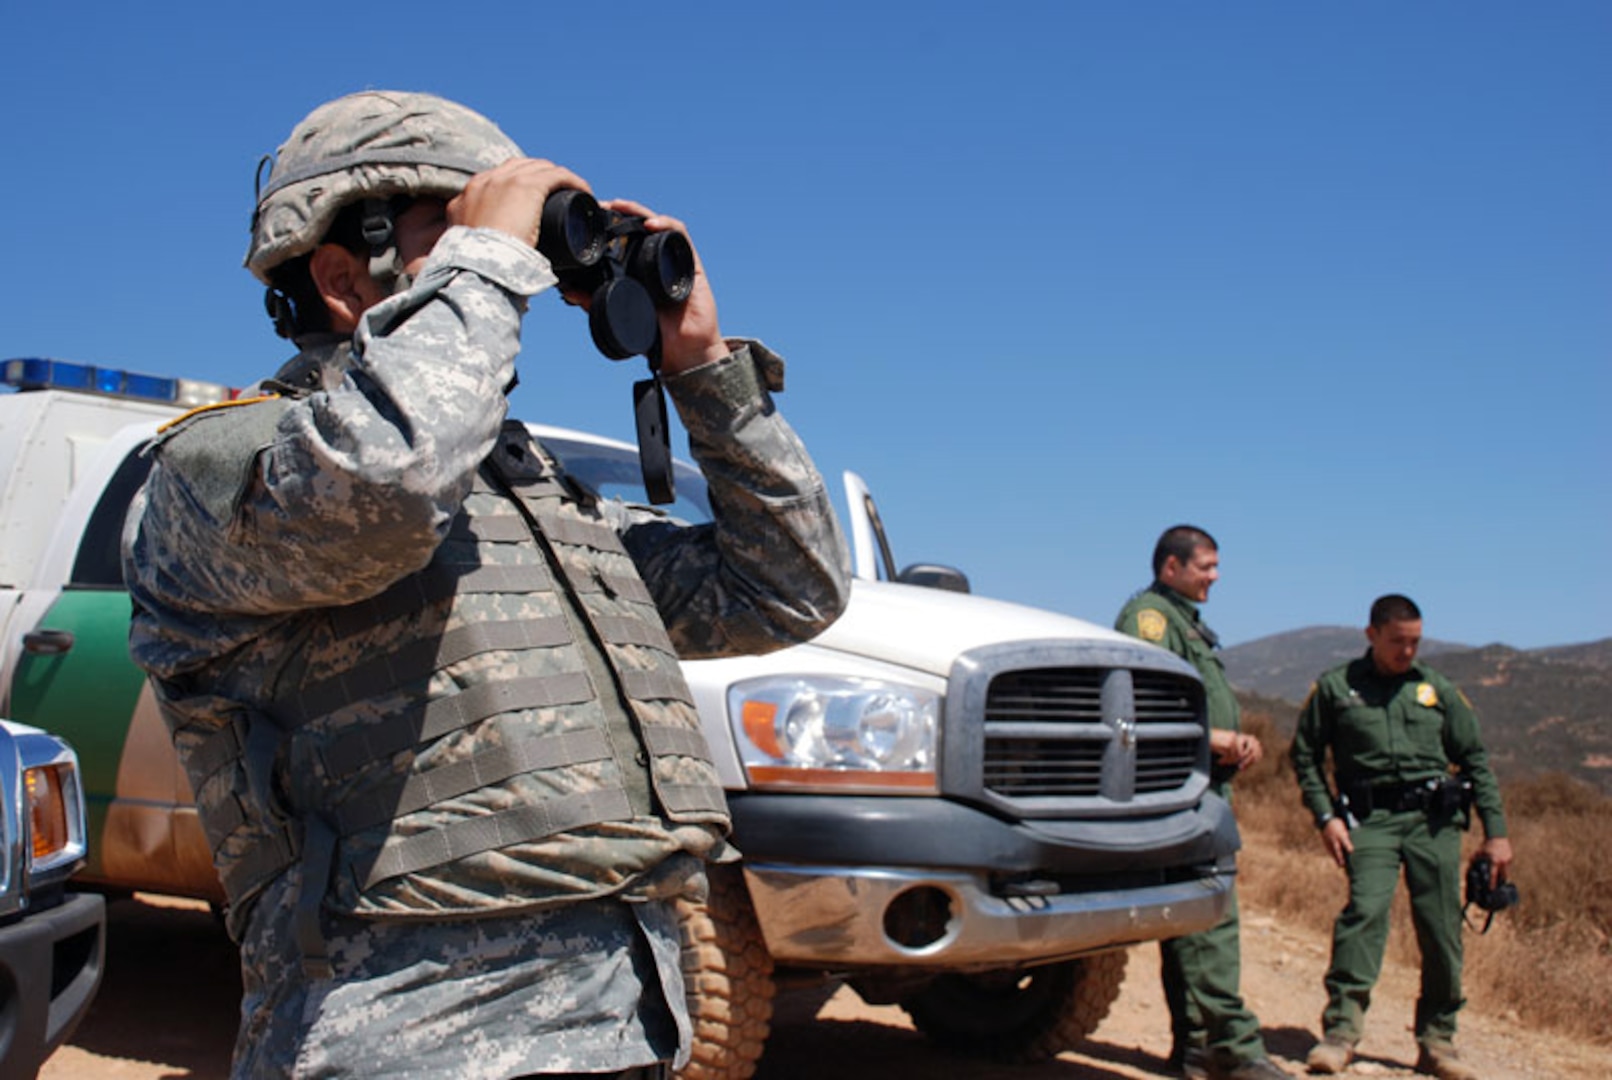 A California National Guard Soldier, left, works with U.S. Customs and Border Protection agents to scour the hills near the U.S.-Mexico border.